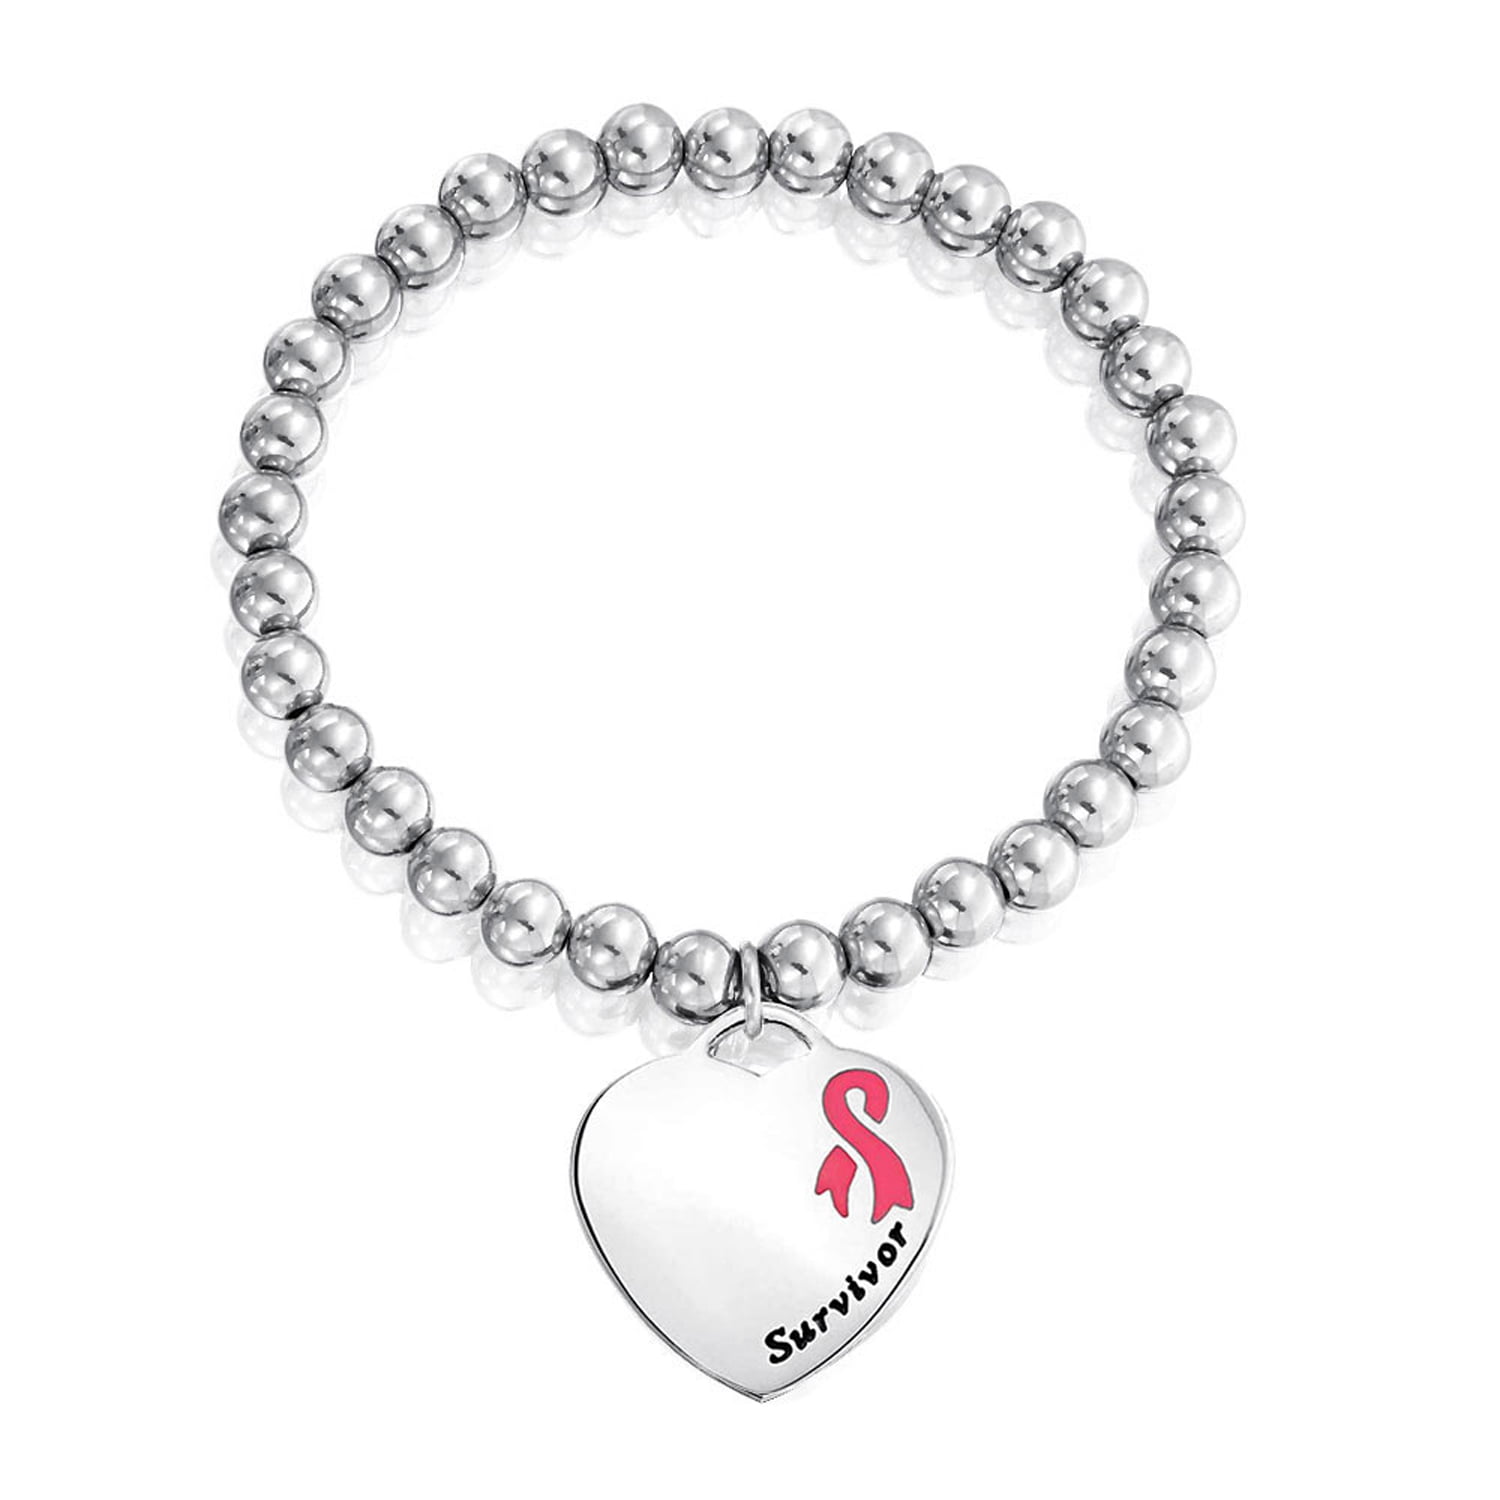 My Identity Doctor Pre-Engraved & Customized Women’s No Nsaids Toggle Medical Charm Bracelet Black & Steel Hearts